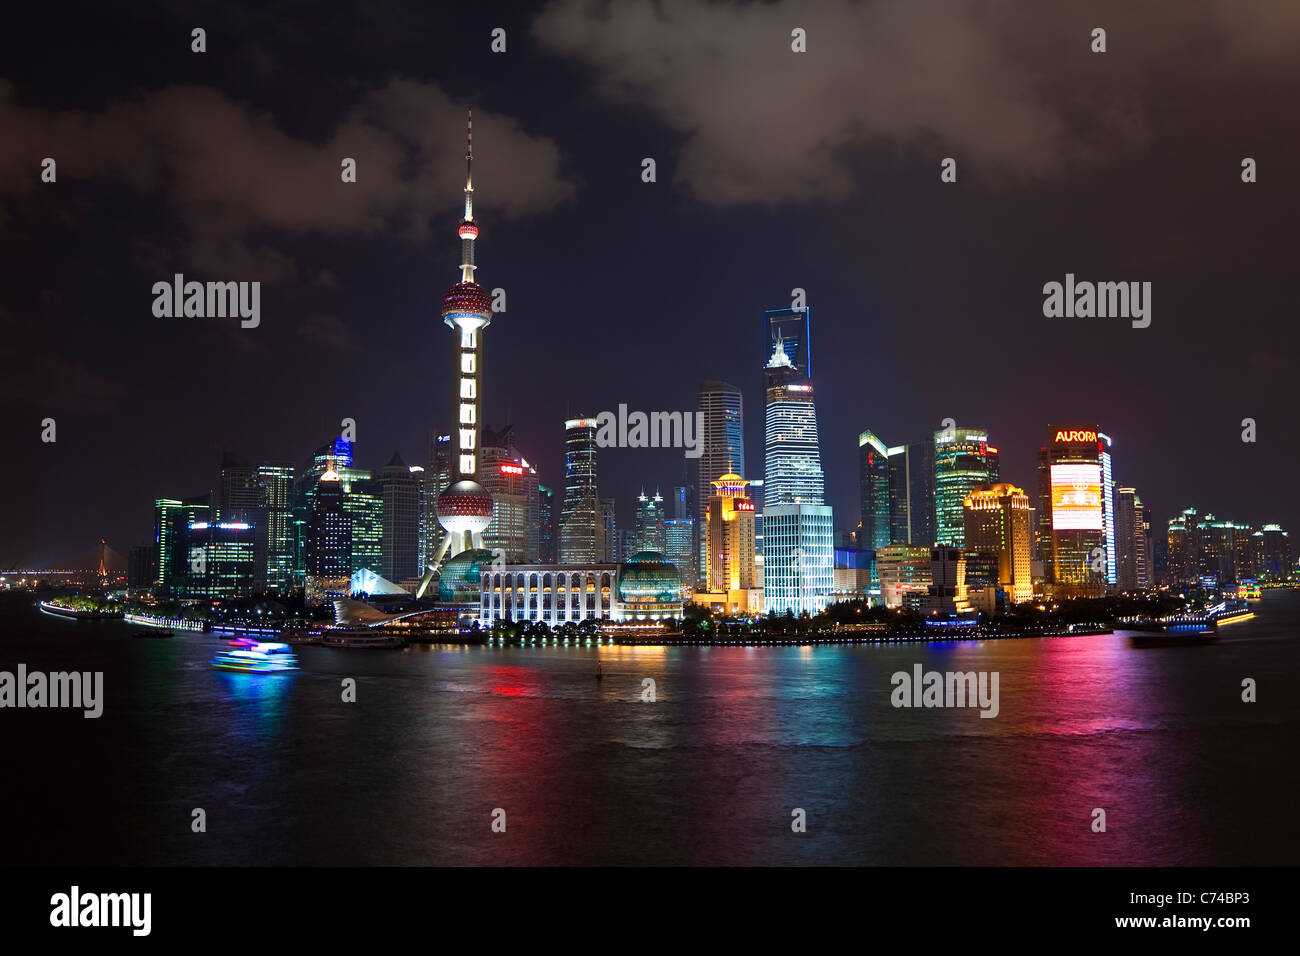 New Pudong skyline, looking across the Huangpu River from the Bund, Shanghai, China Stock Photo